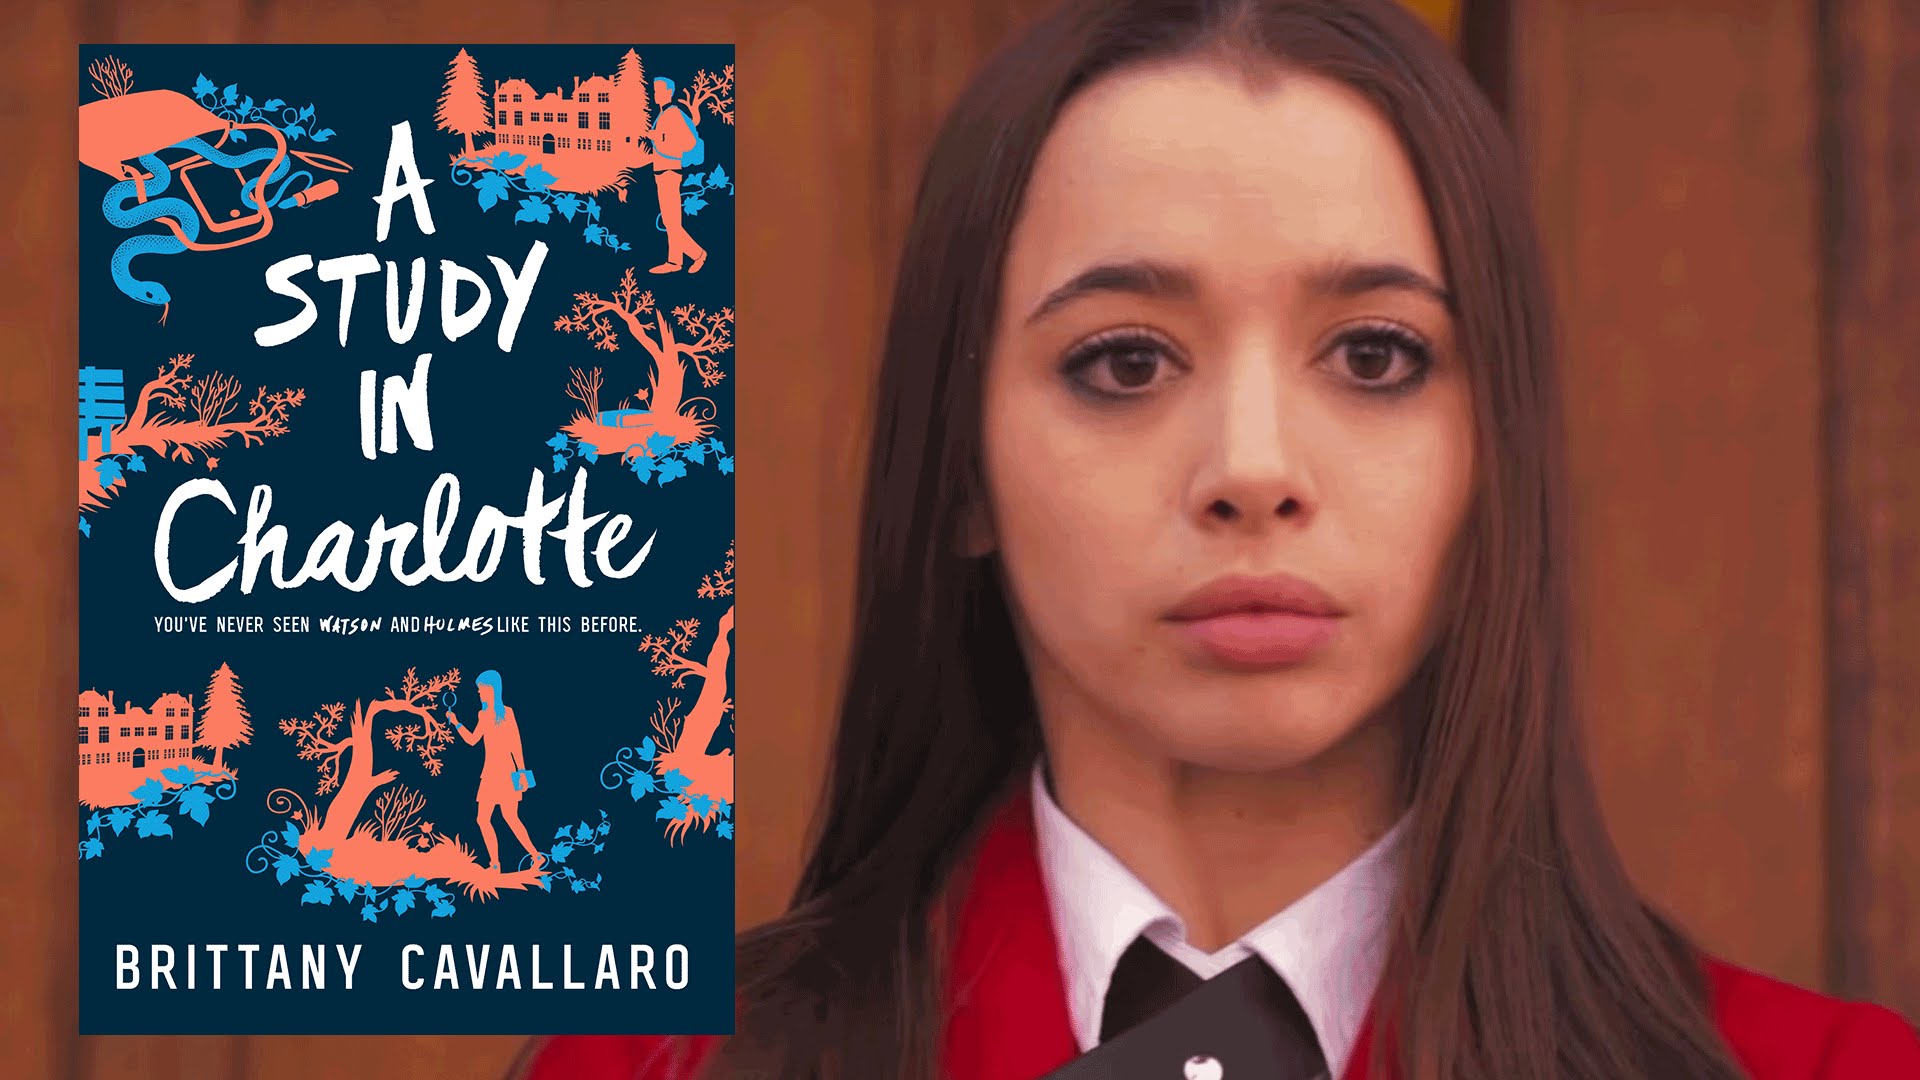 A STUDY IN CHARLOTTE by Brittany Cavallaro | Official Book Trailer